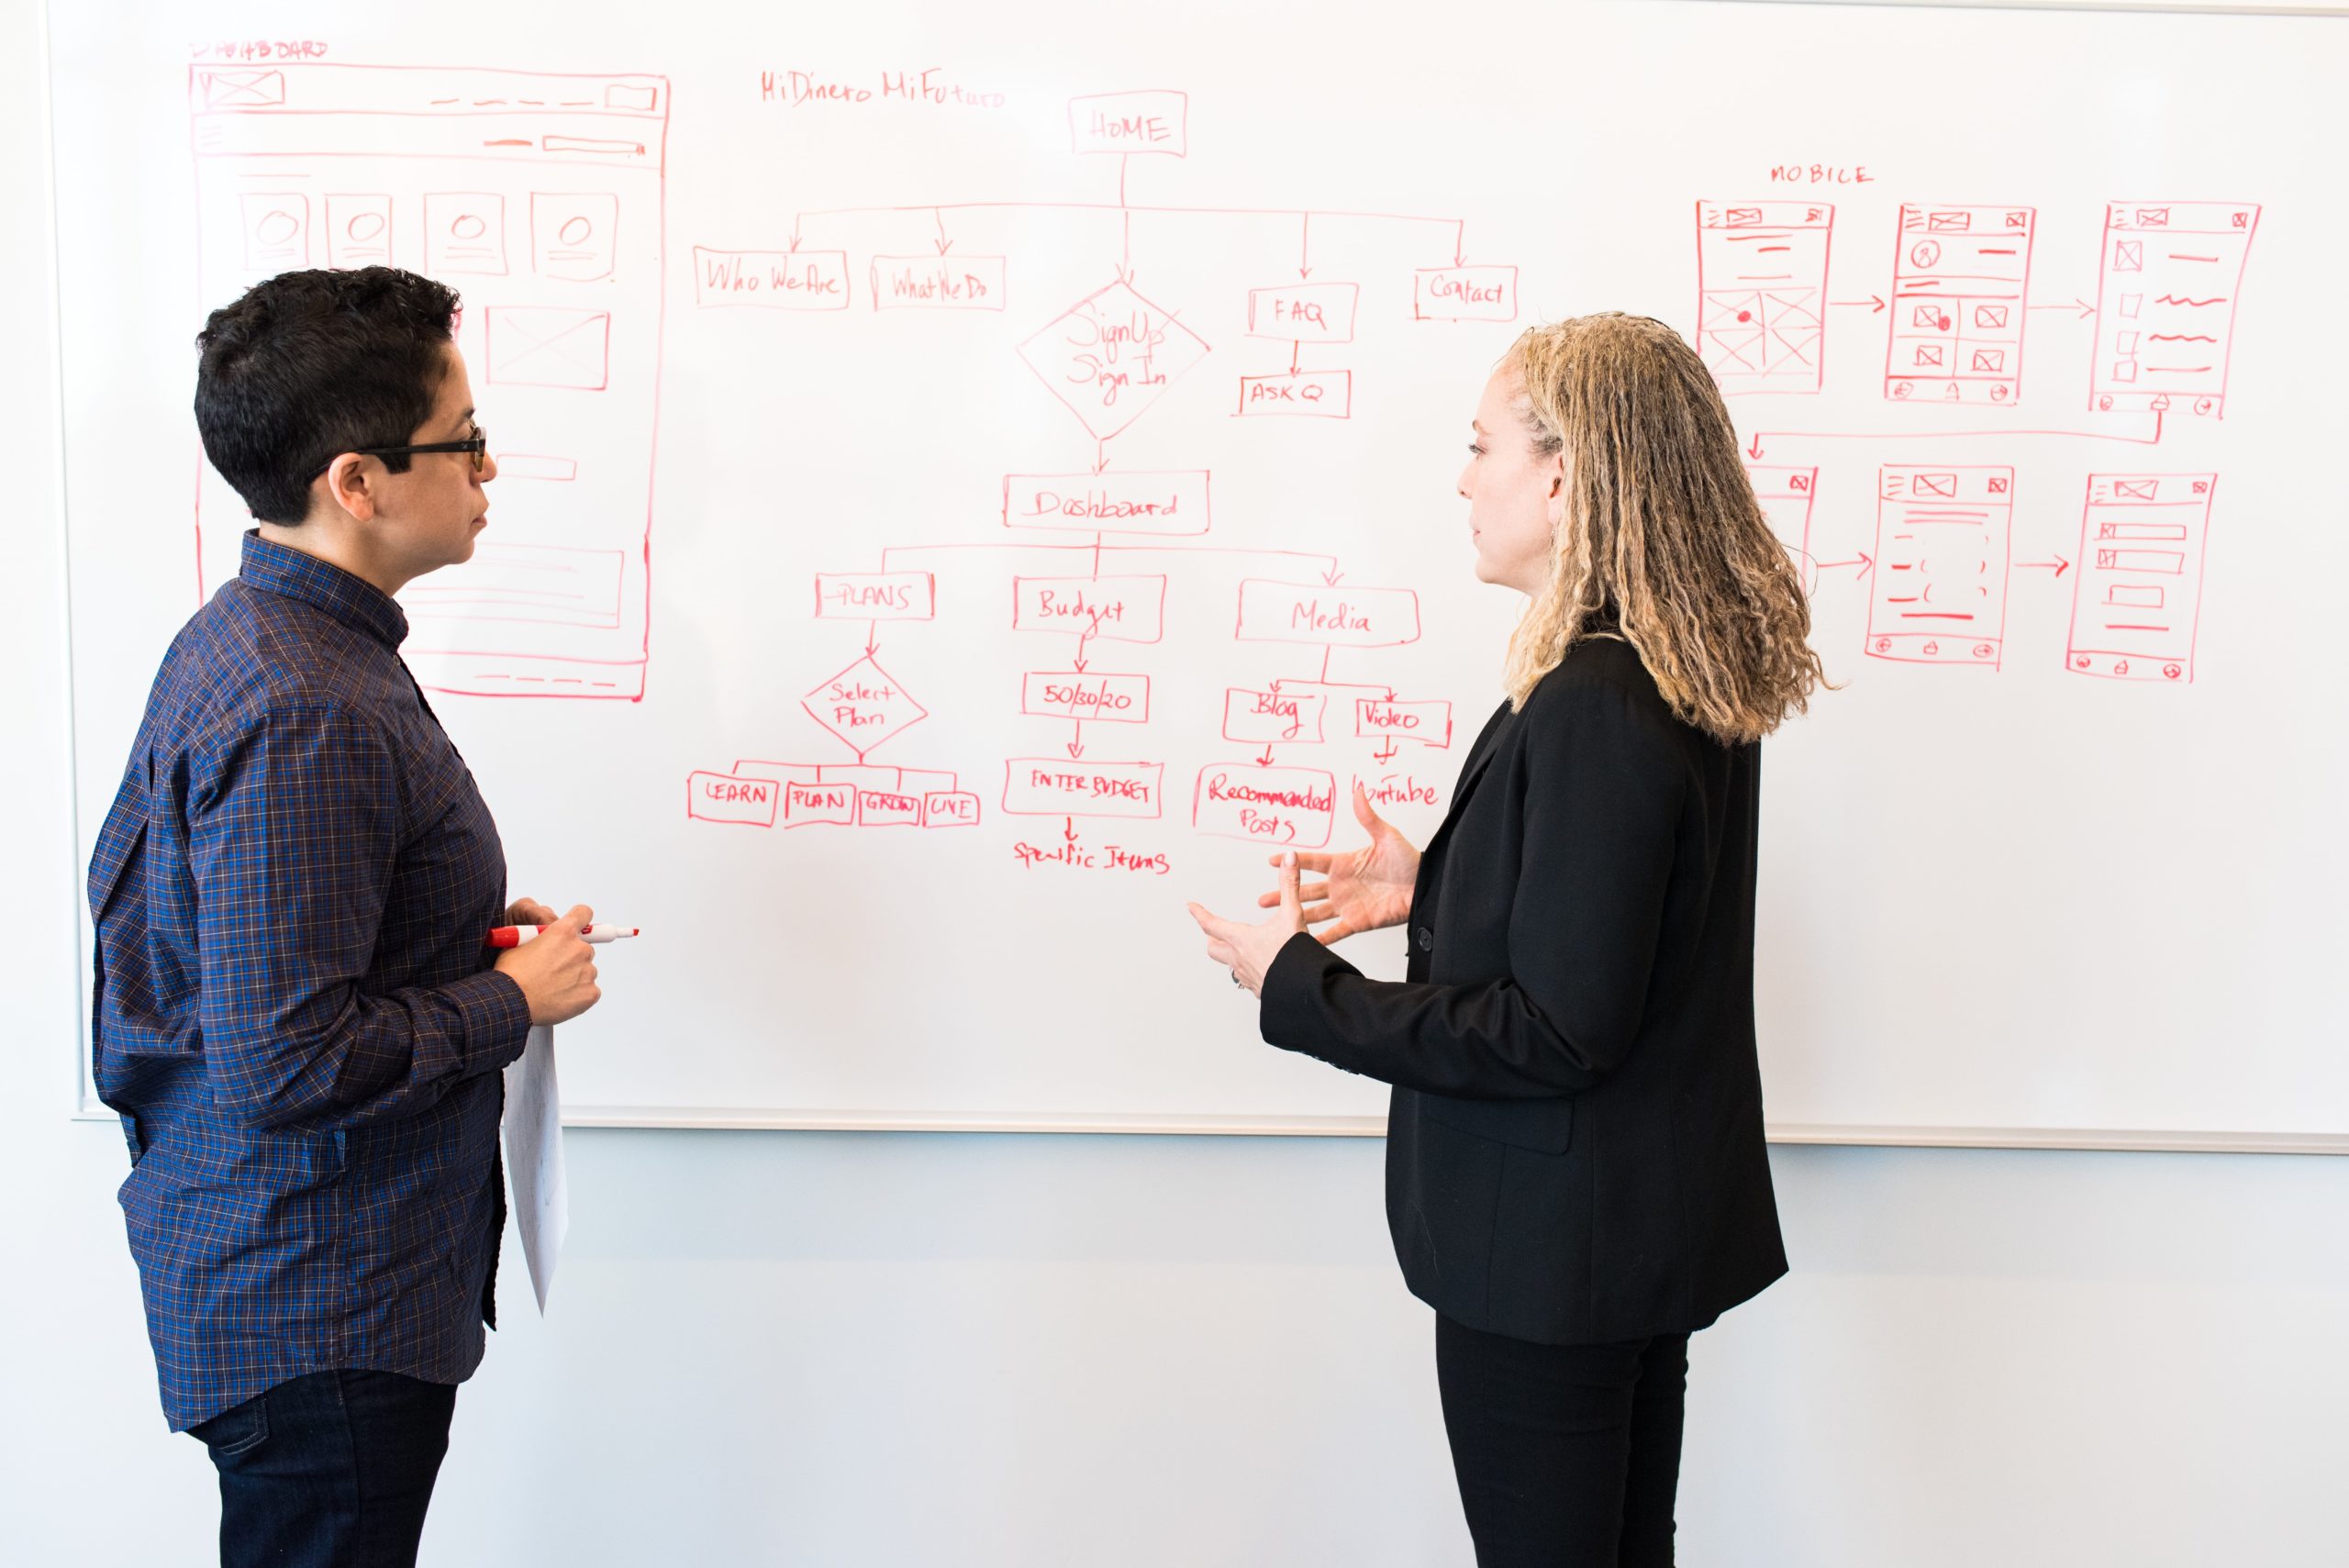 Two people stand in front of a white board that has flow charts drawn in red ink.